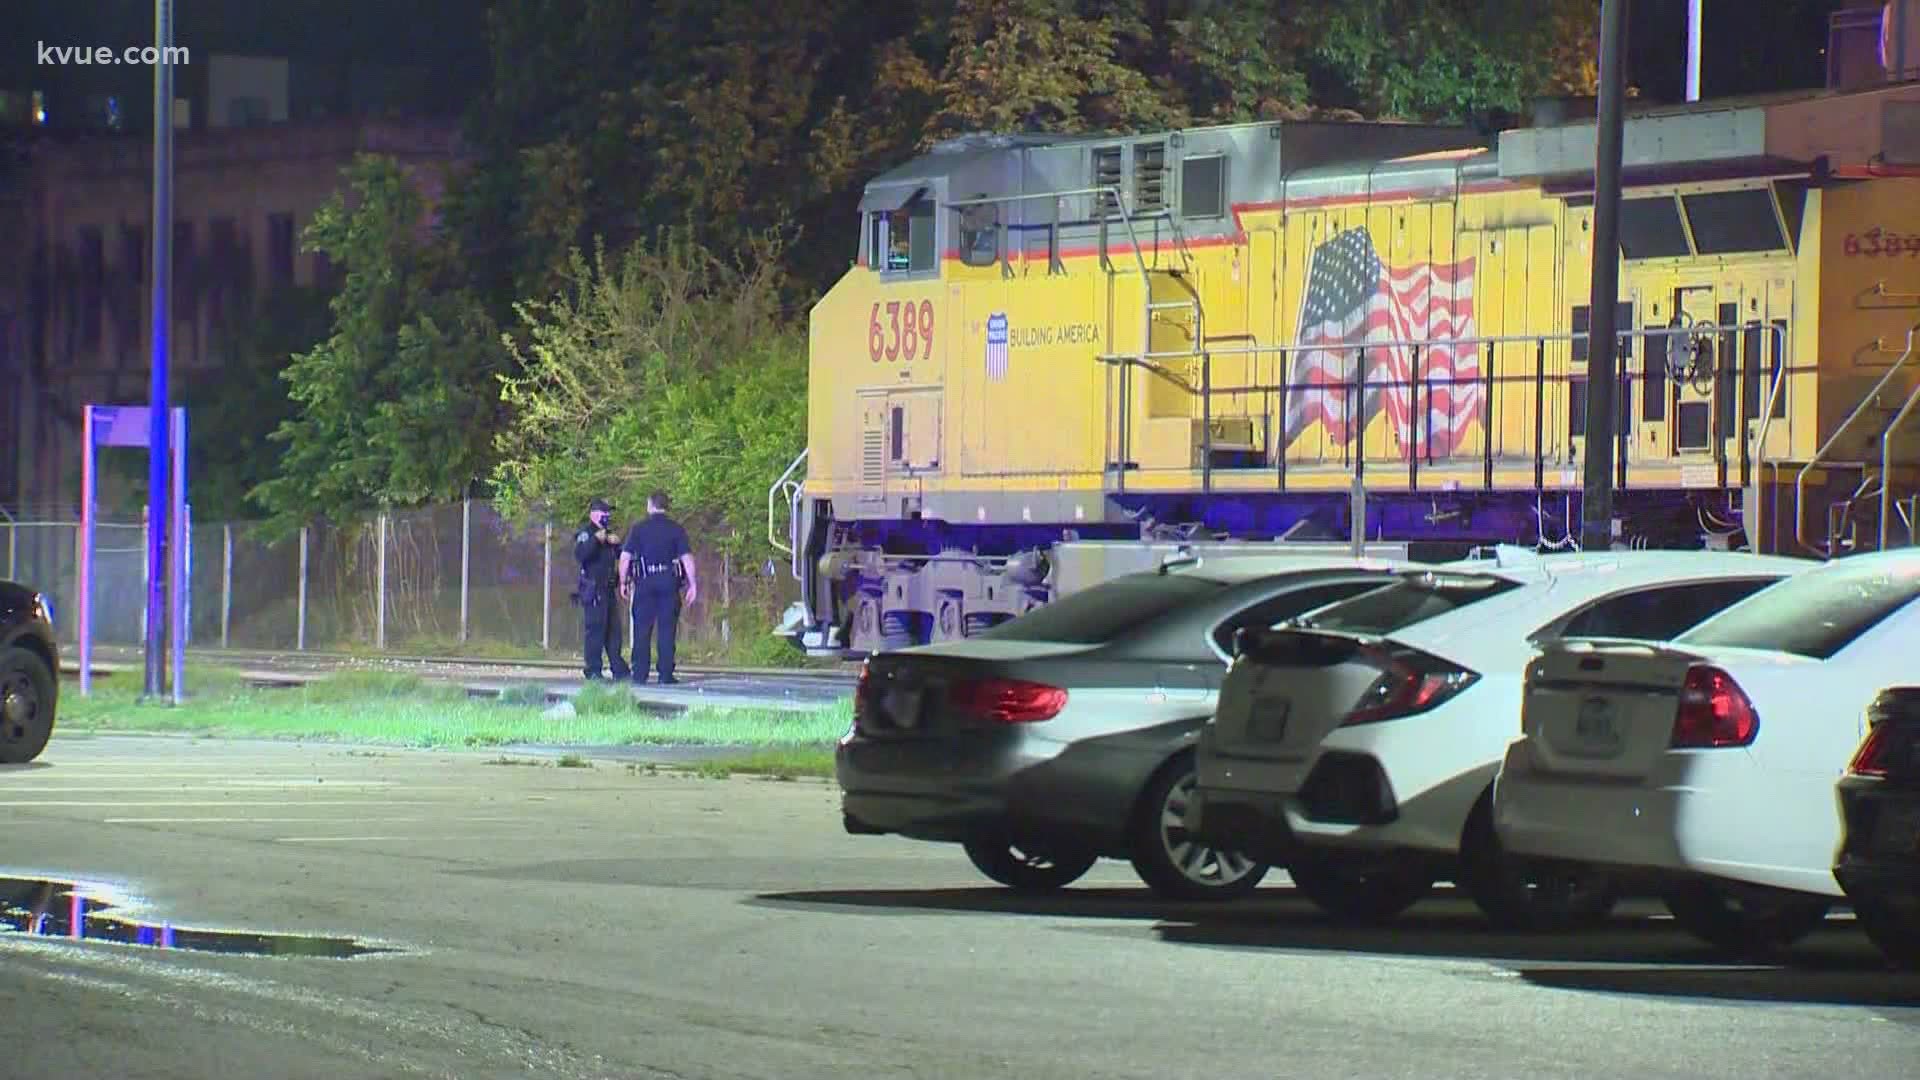 A person is dead after being hit by a train in Downtown Austin Friday night.